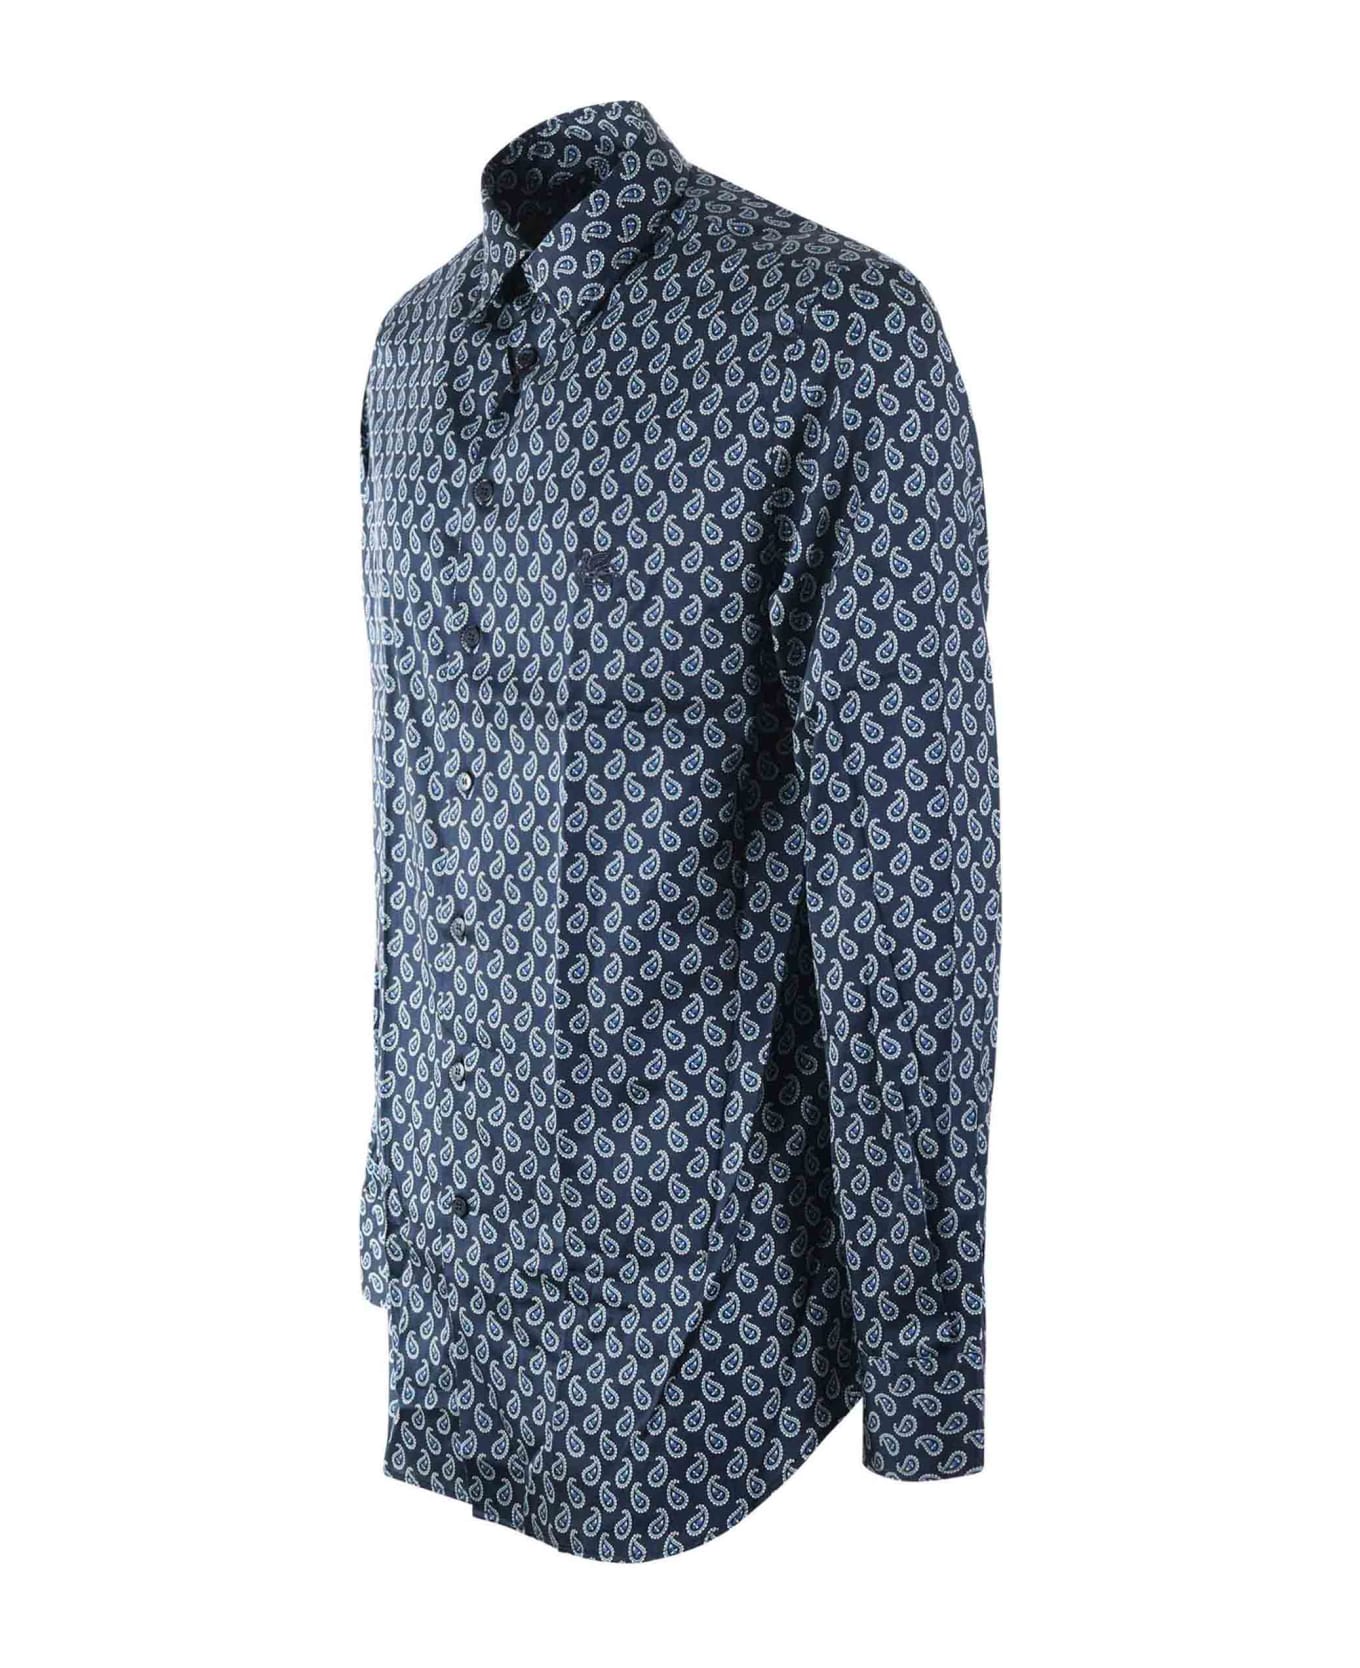 Etro Navy Blue Shirt With Micro Paisley Print - Blue